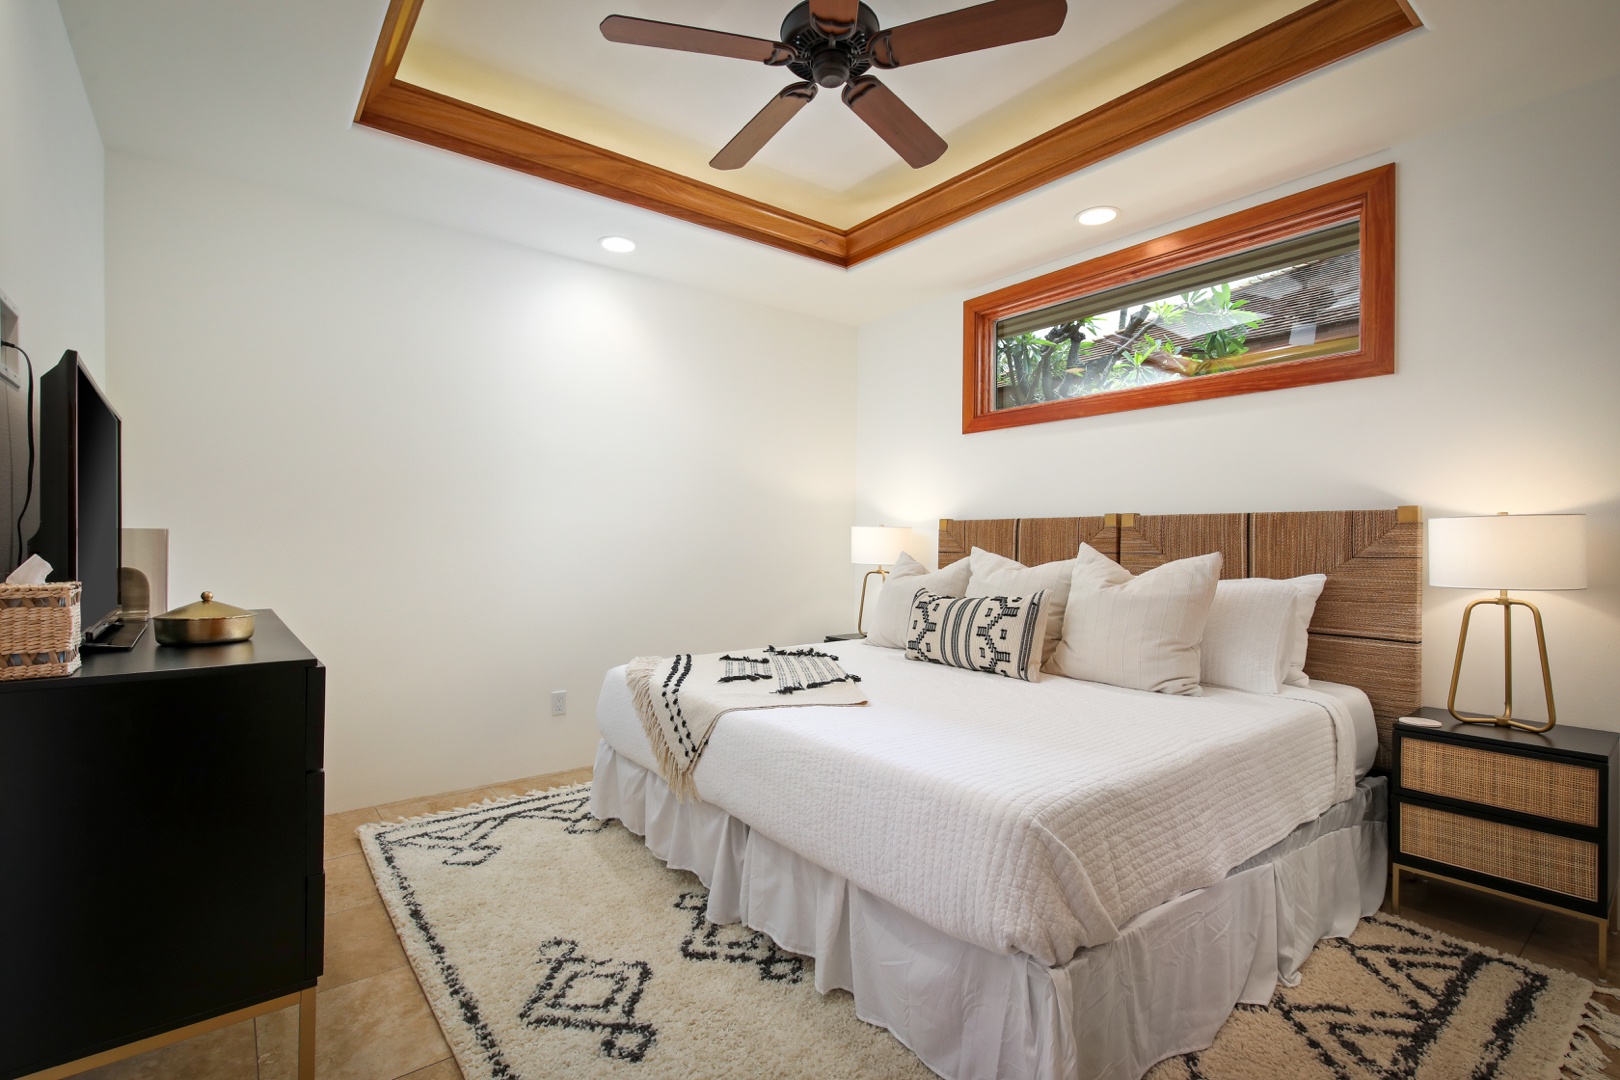 Kailua Kona Vacation Rentals, 4BD Pakui Street (147) Estate Home at Four Seasons Resort at Hualalai - Guest Suite #2 w/either king bed (pictured) or 2 twin beds per your request.